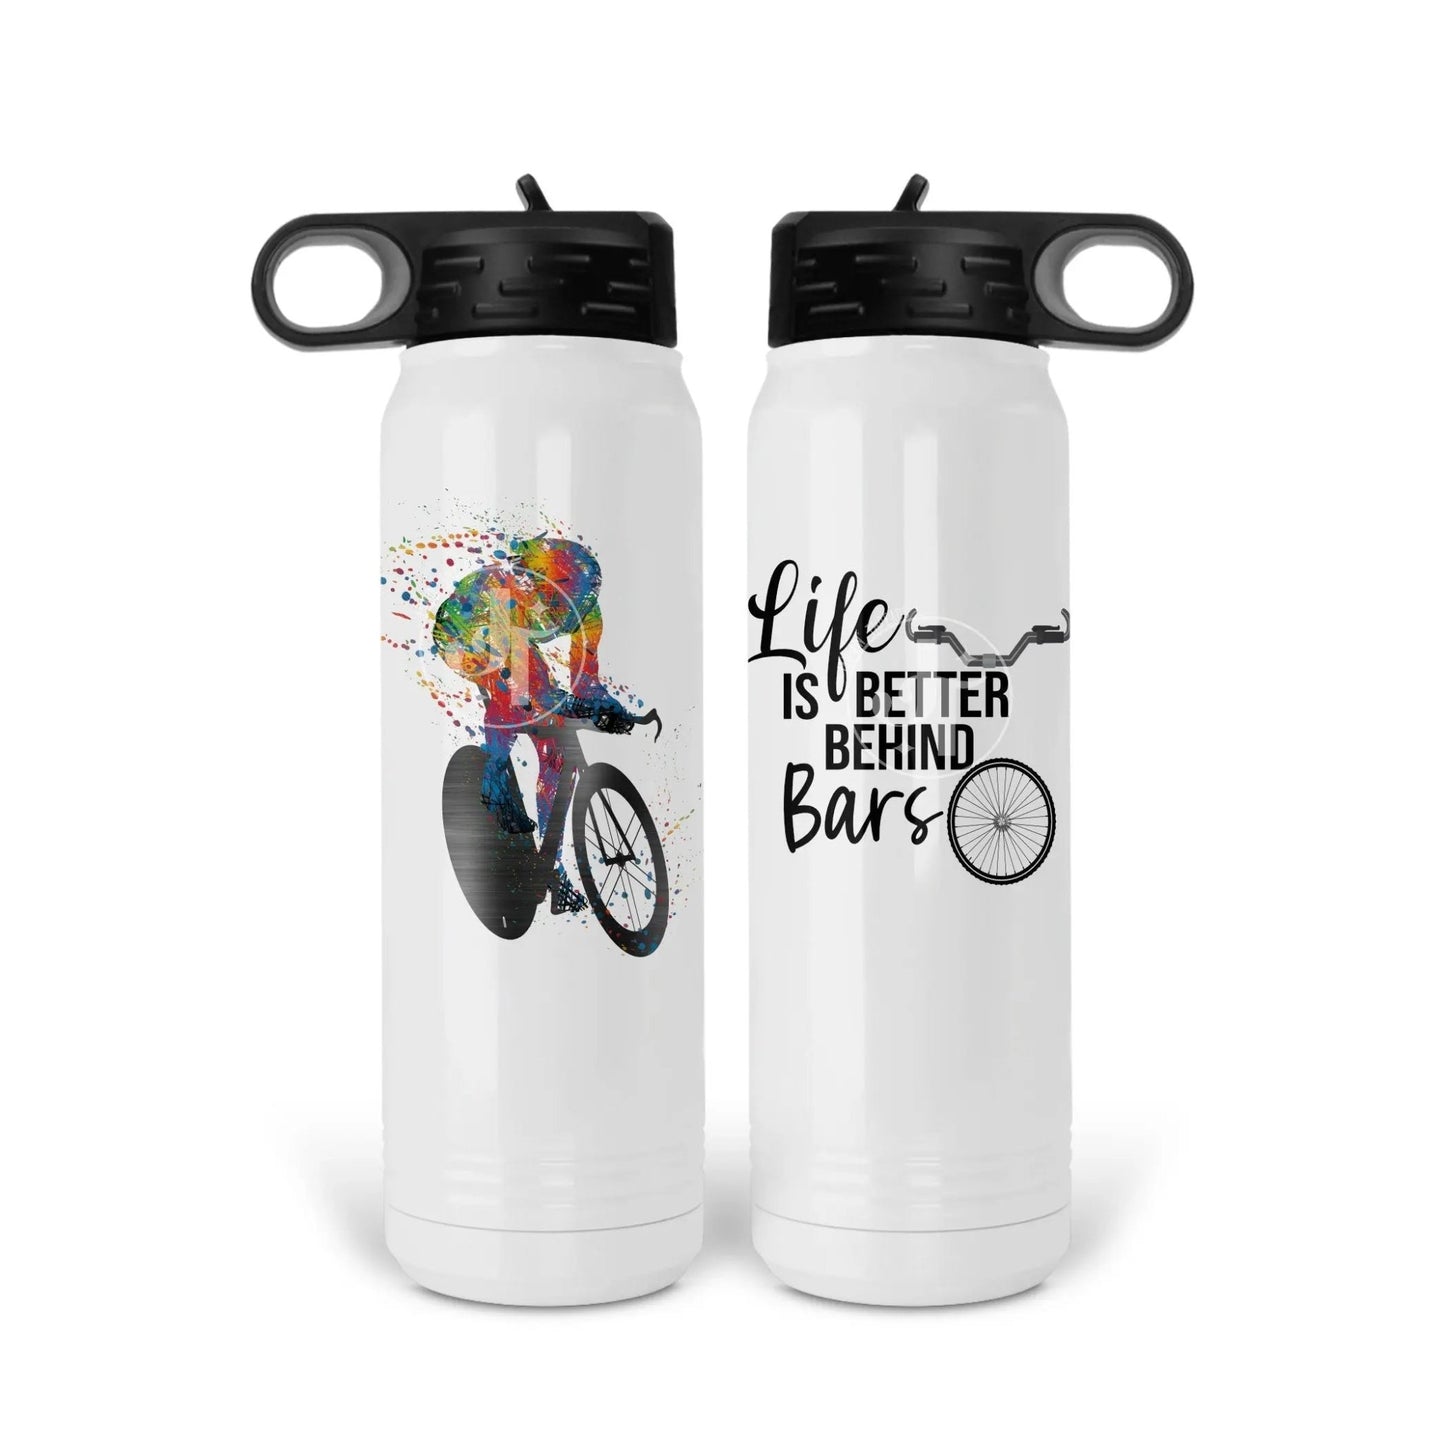 Life is better behind bars - Jammin Threads